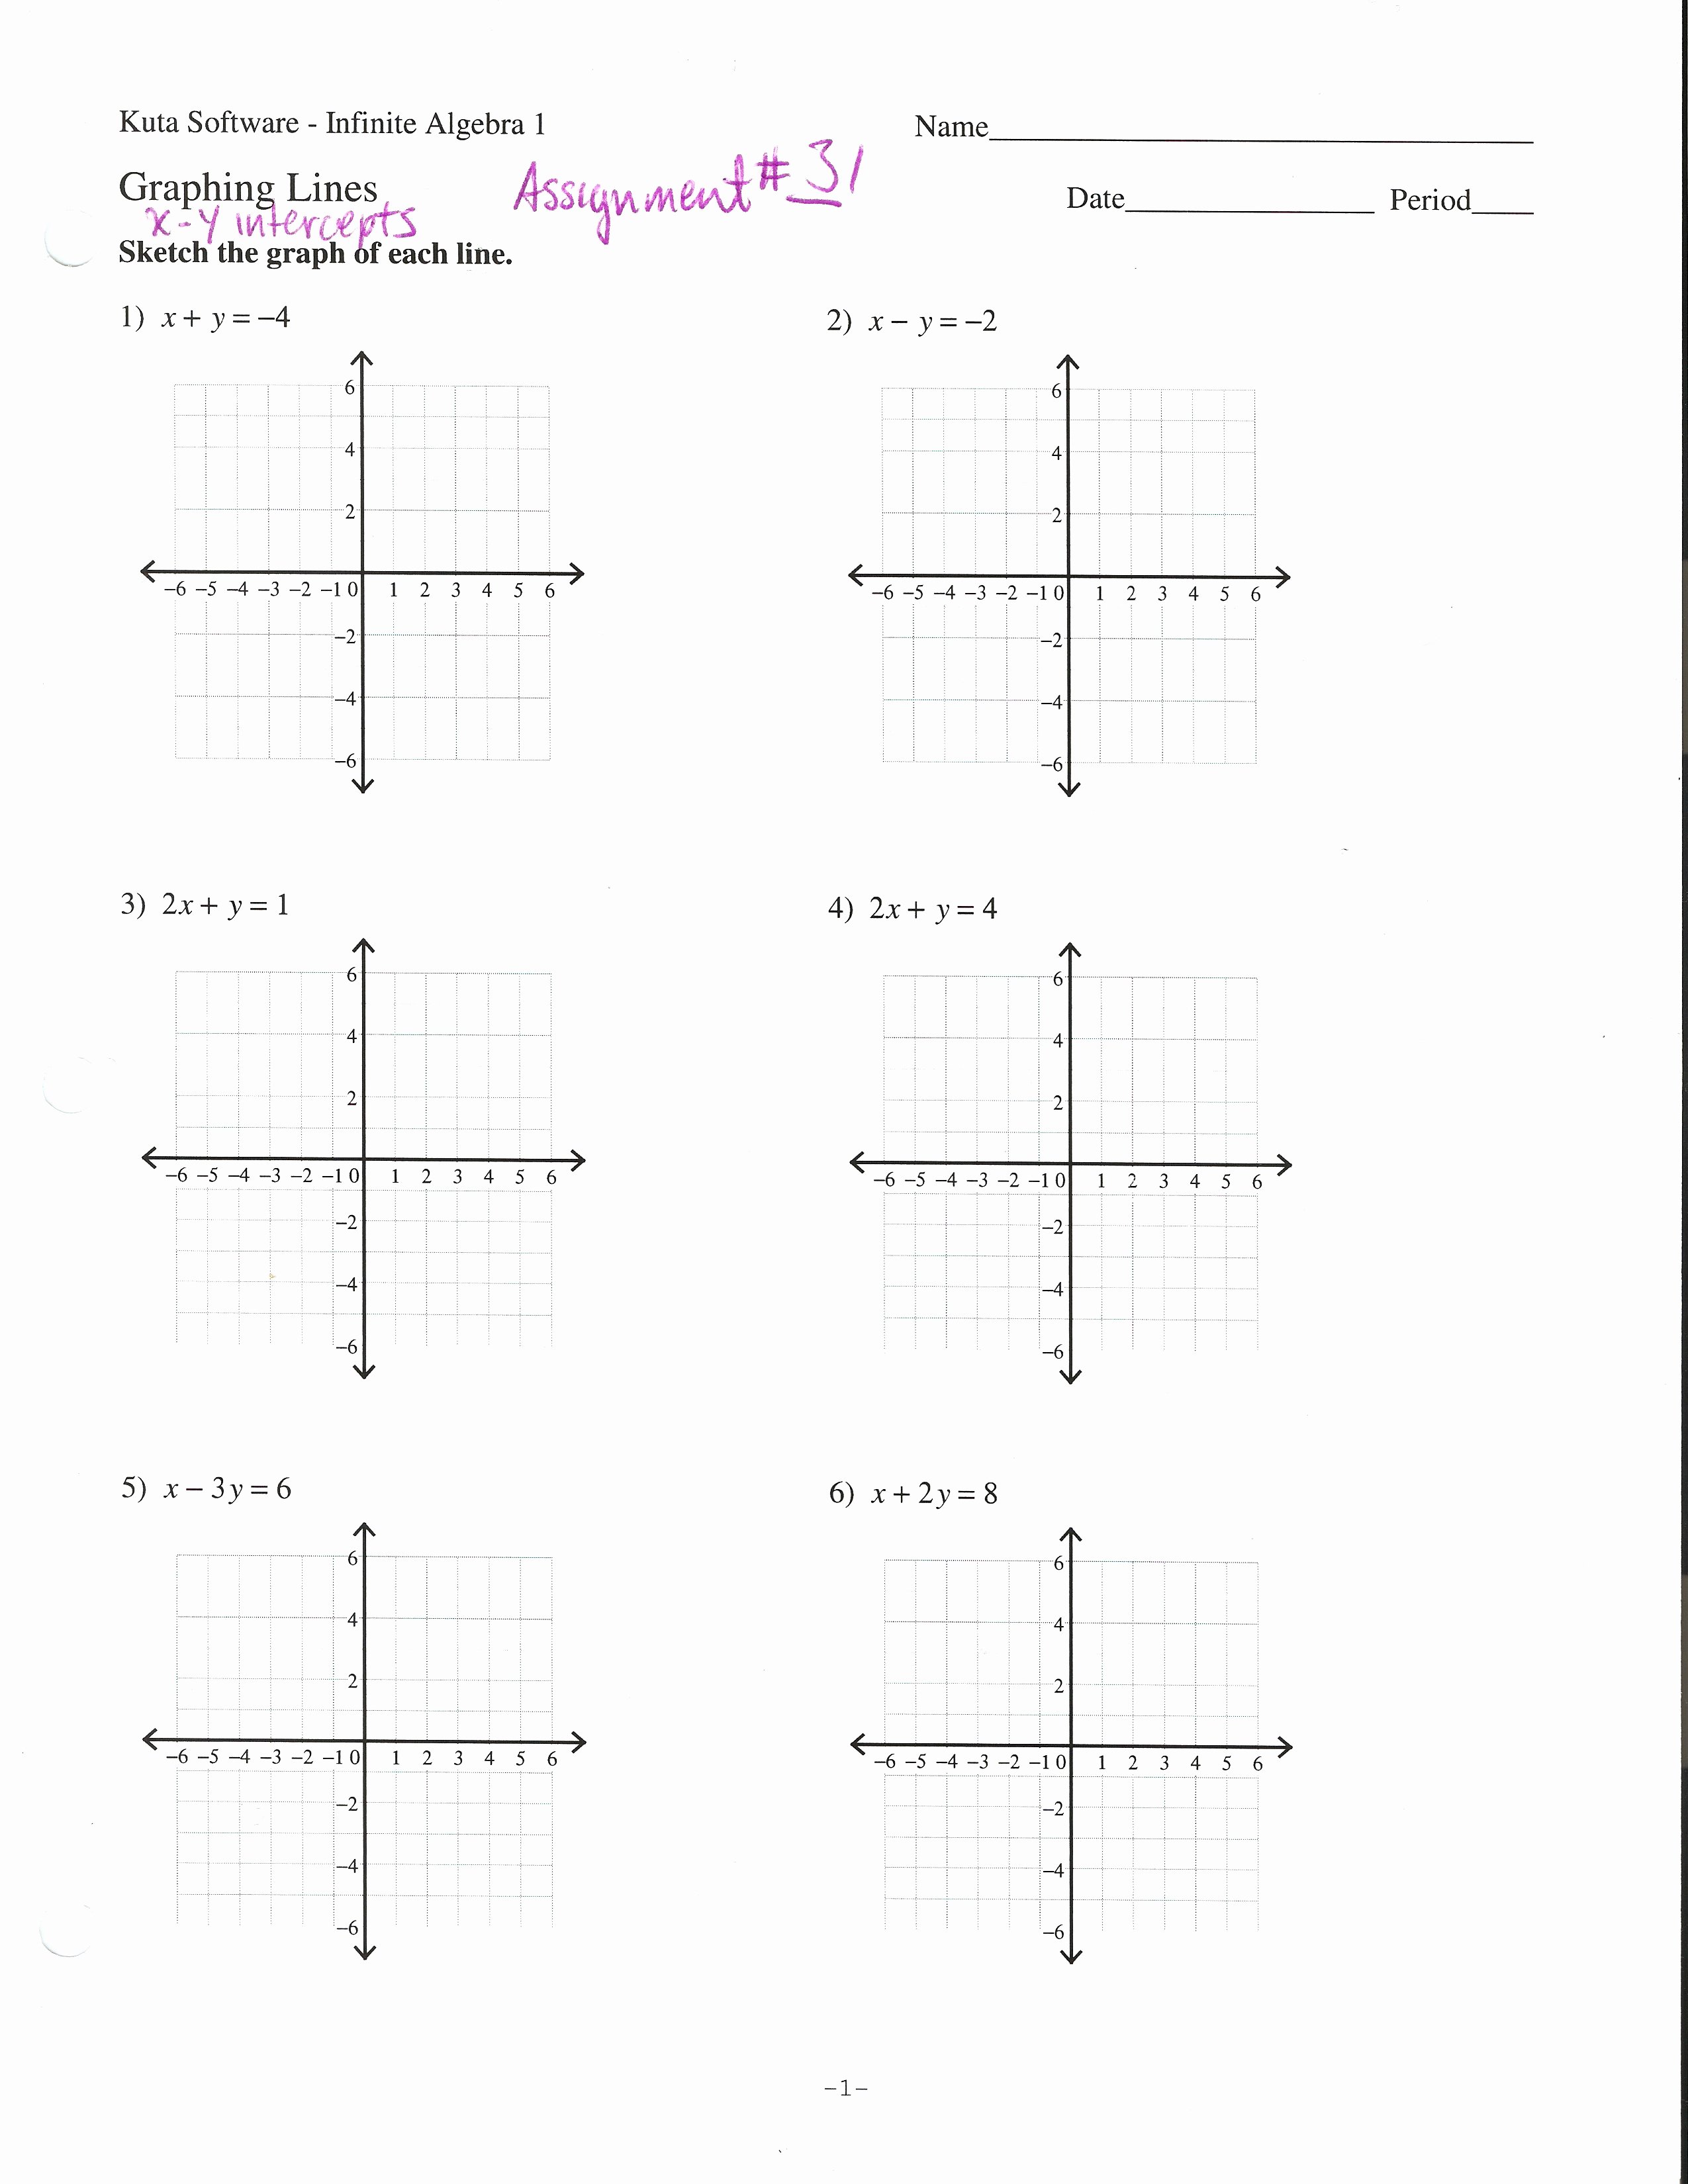 Writing Linear Equations Worksheet Answers Awesome Writing Linear Equations Worksheet Answers the Best